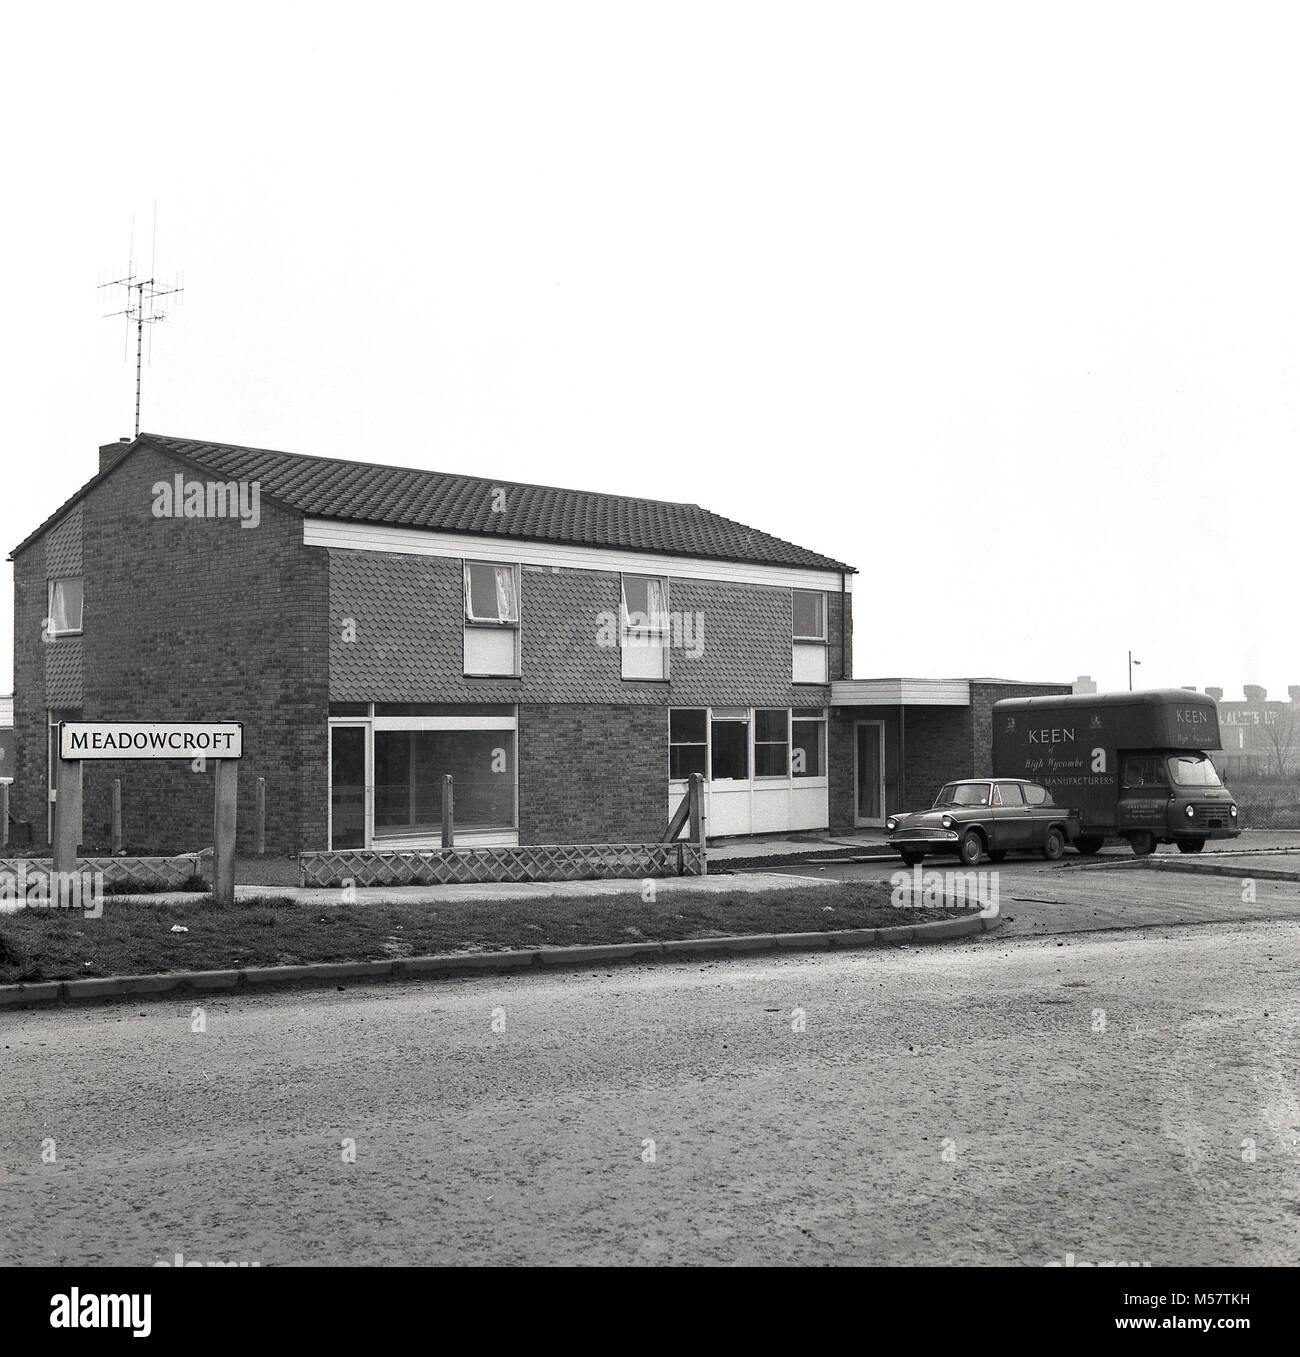 1965, historical picture shows a new building on a housing estate recently built at Meadowcroft, Aylesbury Bucks, England, UK. The building originally designed as a house or two houses would be adapted to become a community pub, The John Kennedy, named after the famous American President, JFK. Stock Photo